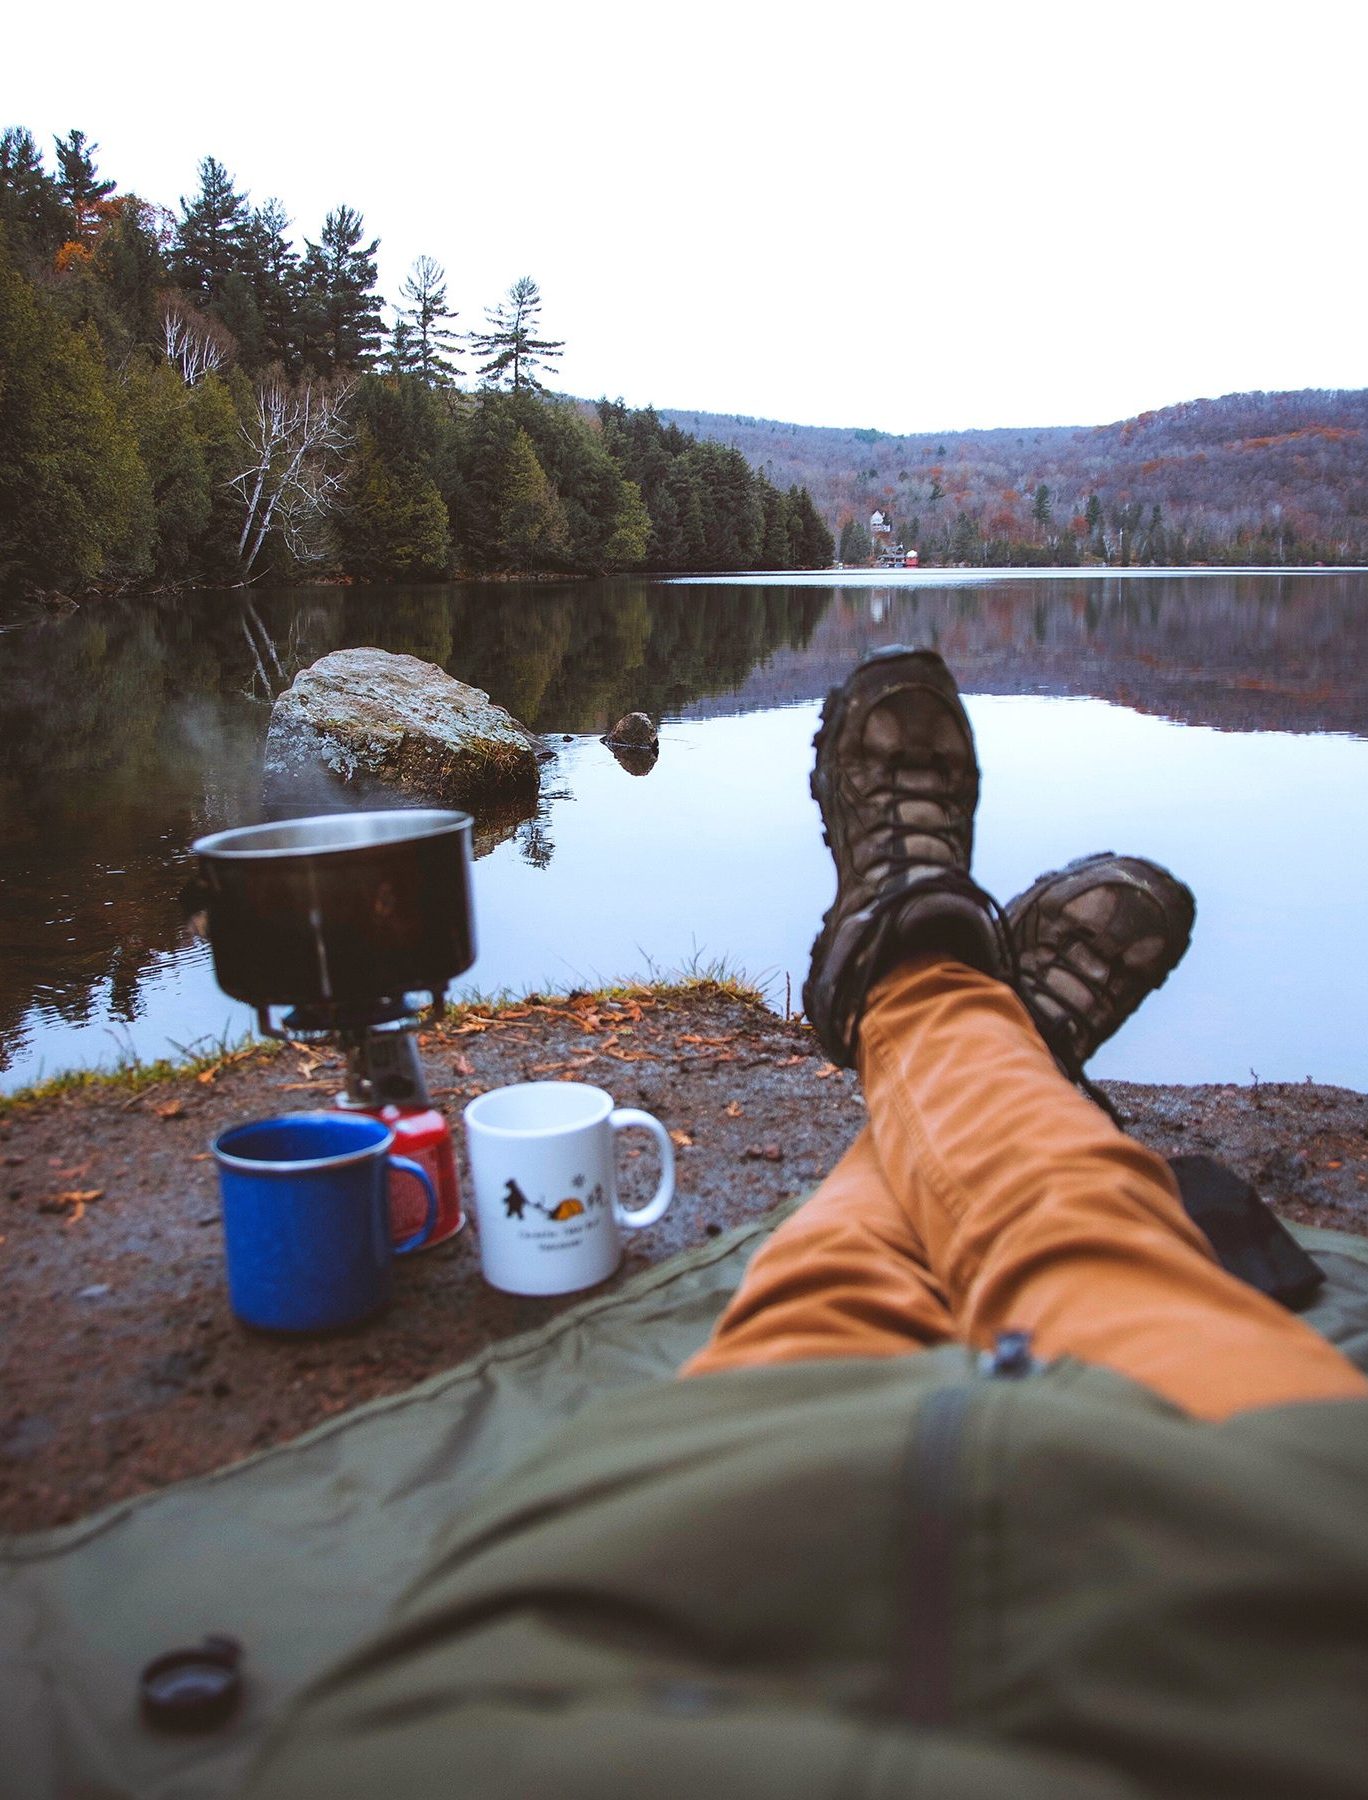 Fall camping guide tip: cool autumn days are made better with hot tea.